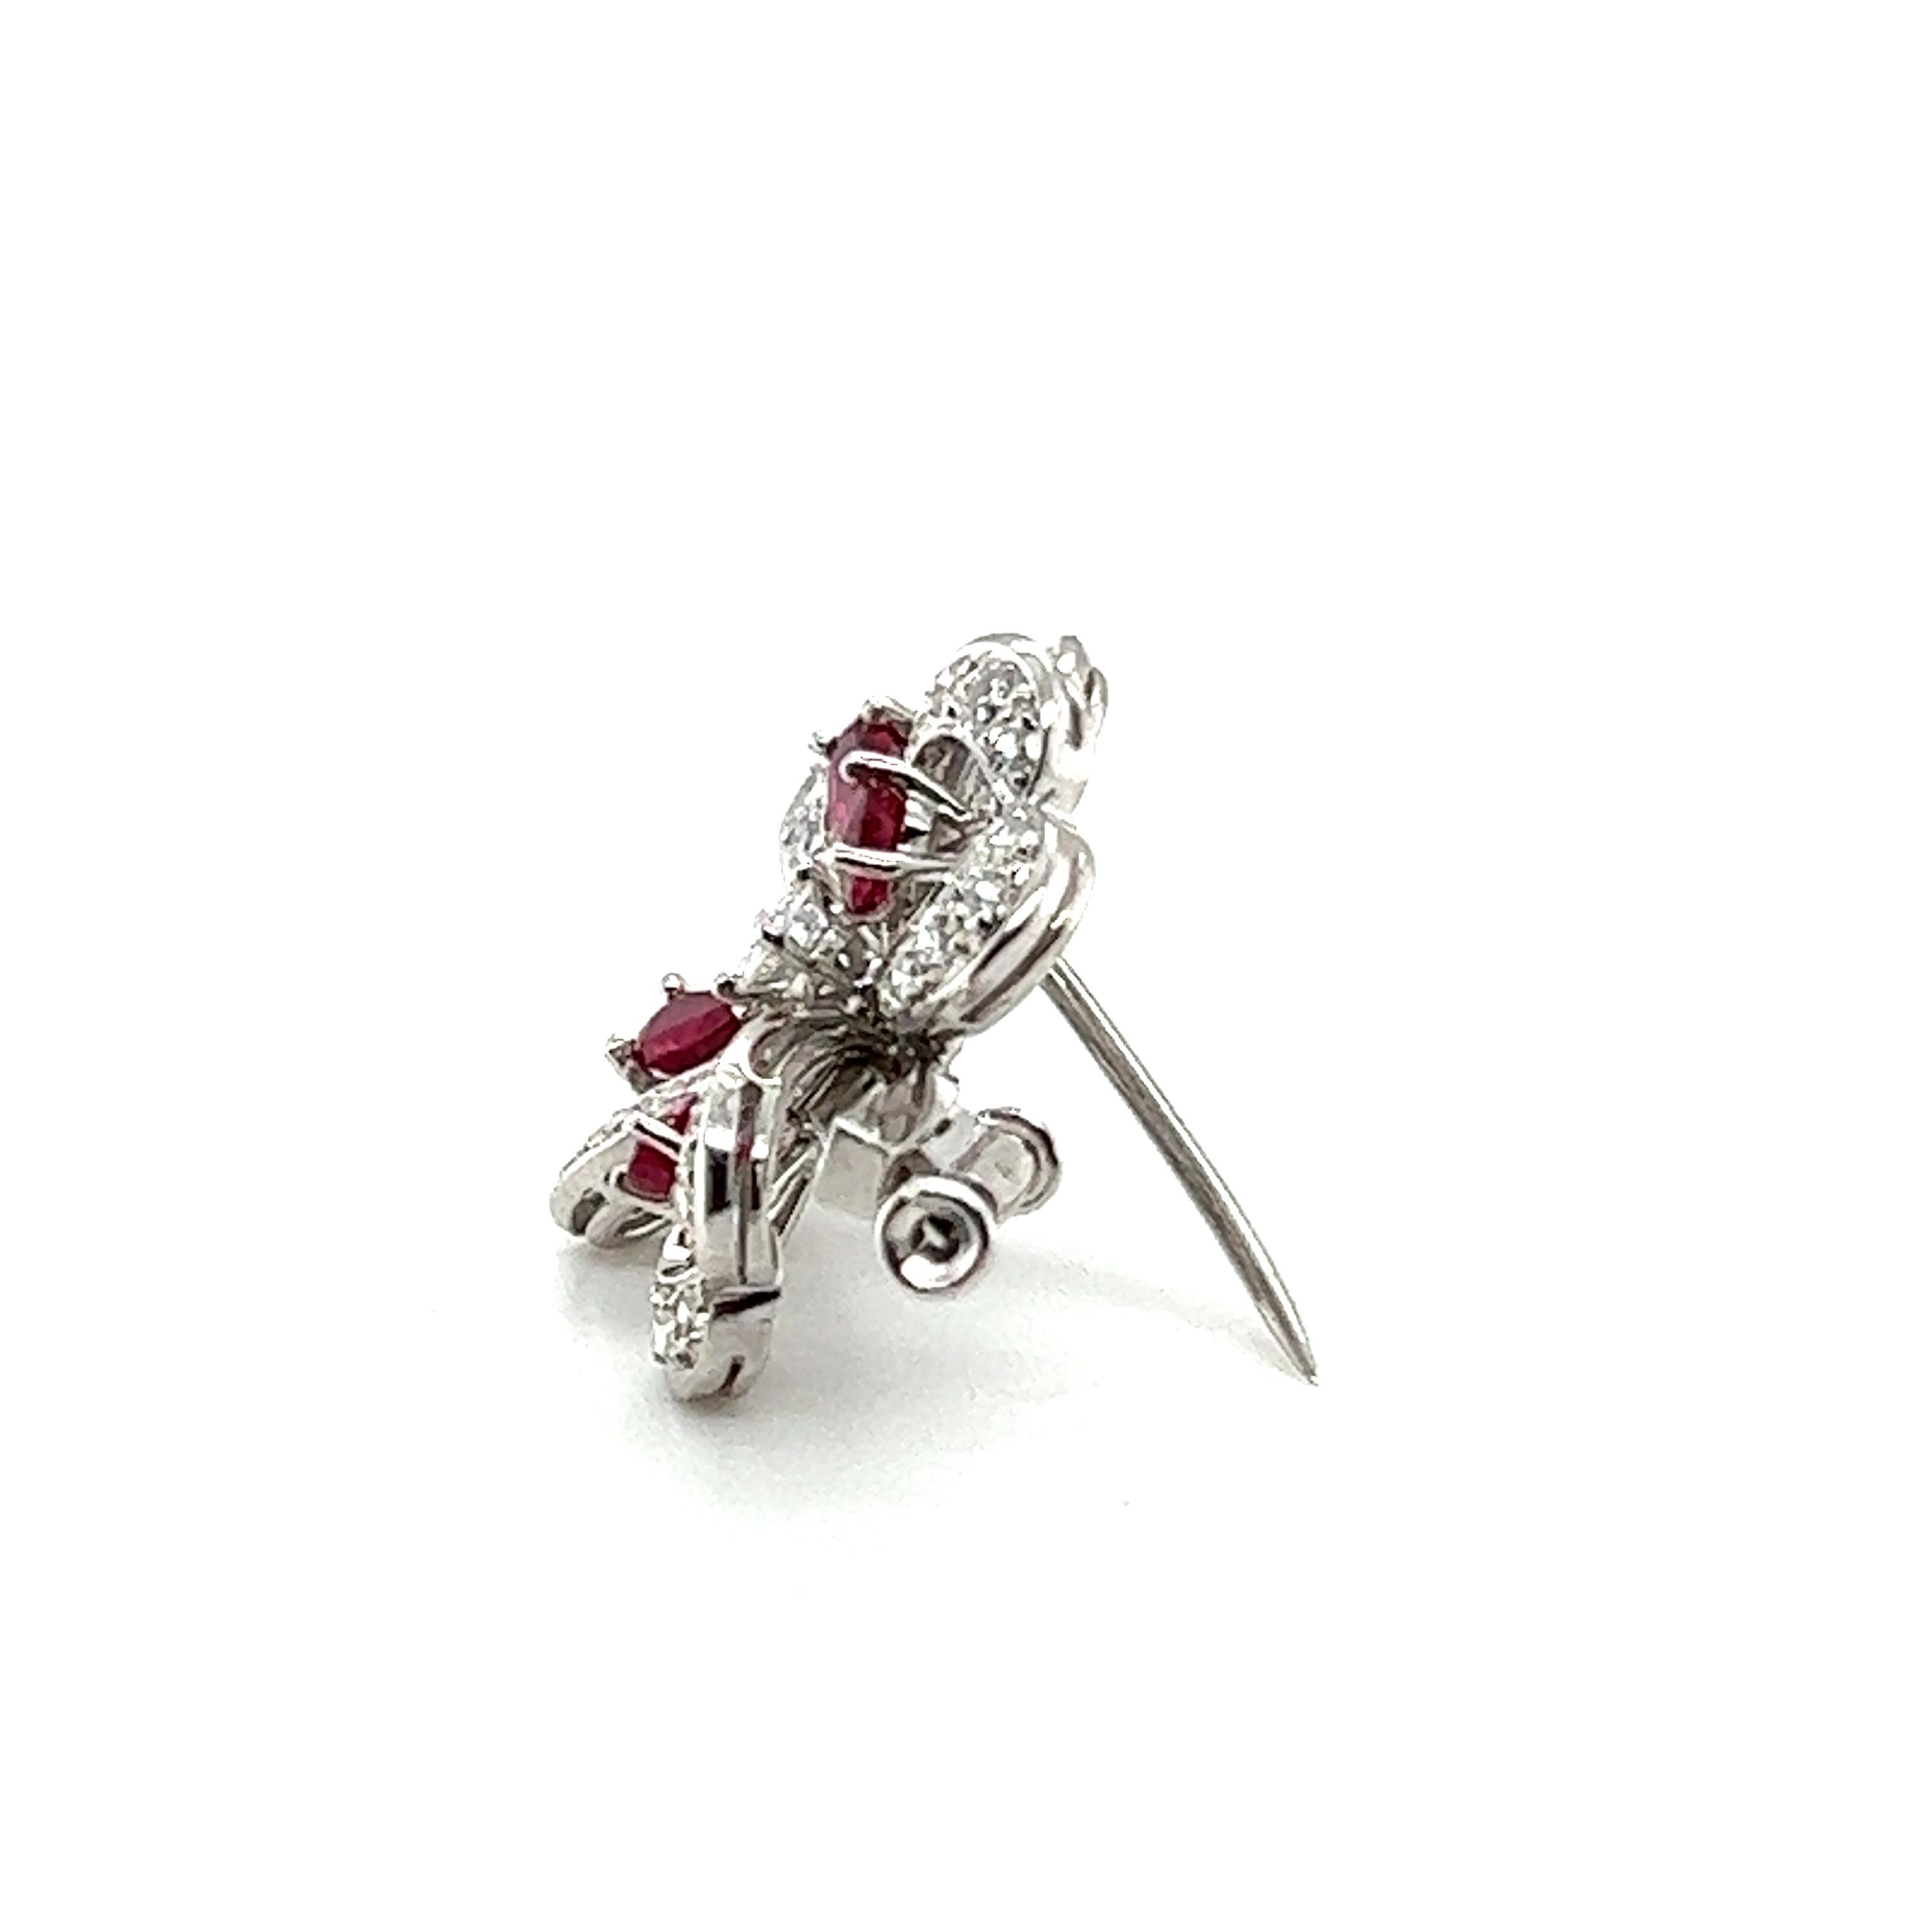 Clover Brooch with Rubies & Diamonds in 18 Karat White Gold by Meister 3